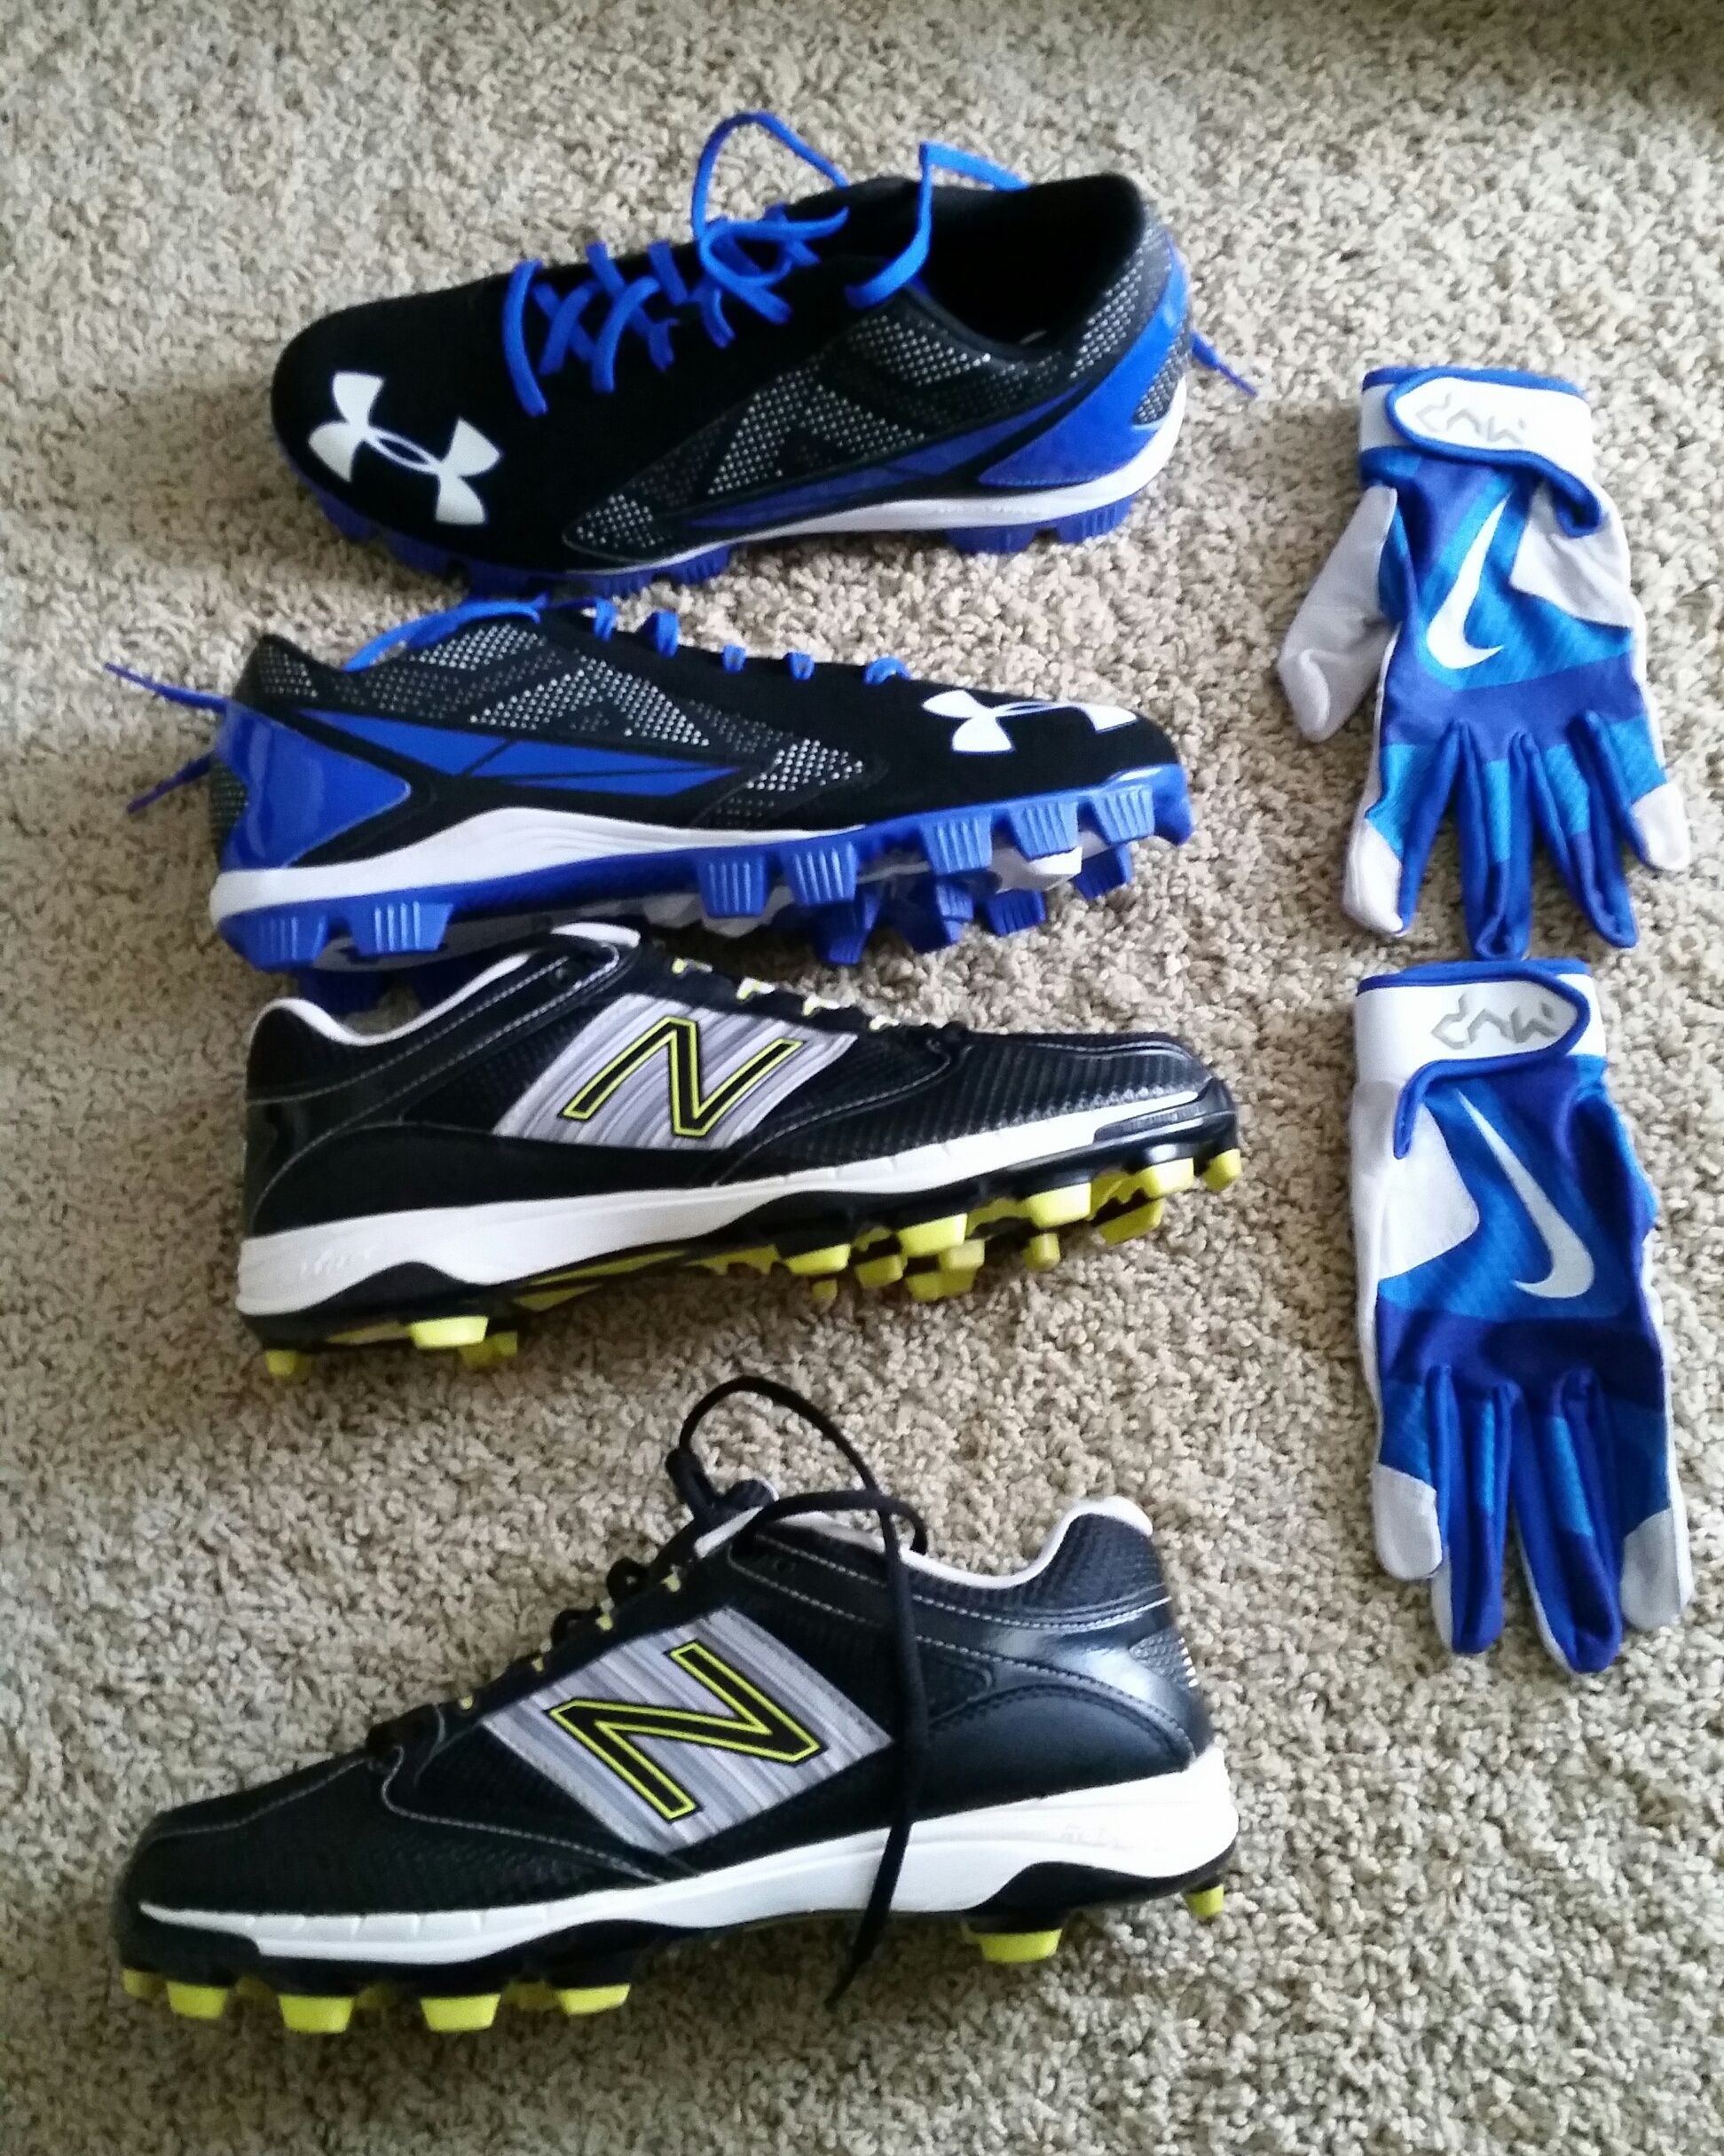 New Balance and Under Armour Baseball Cleats, Nike Batting Gloves.